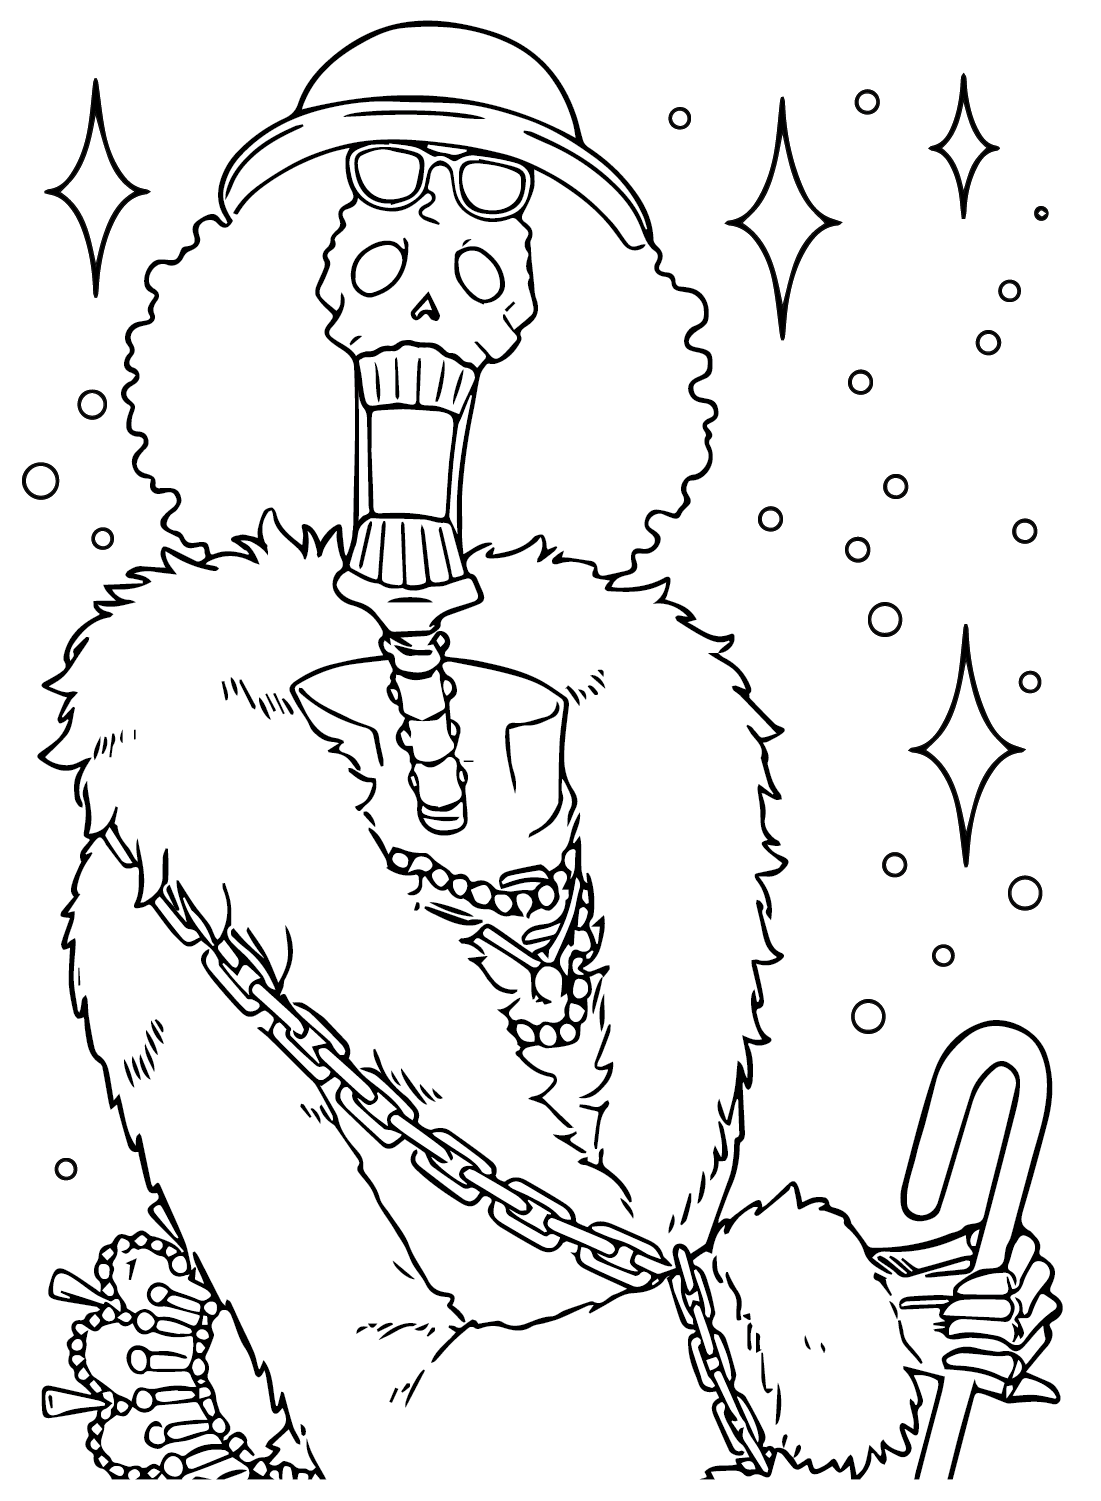 Brook Coloring Pages to Download from Brook